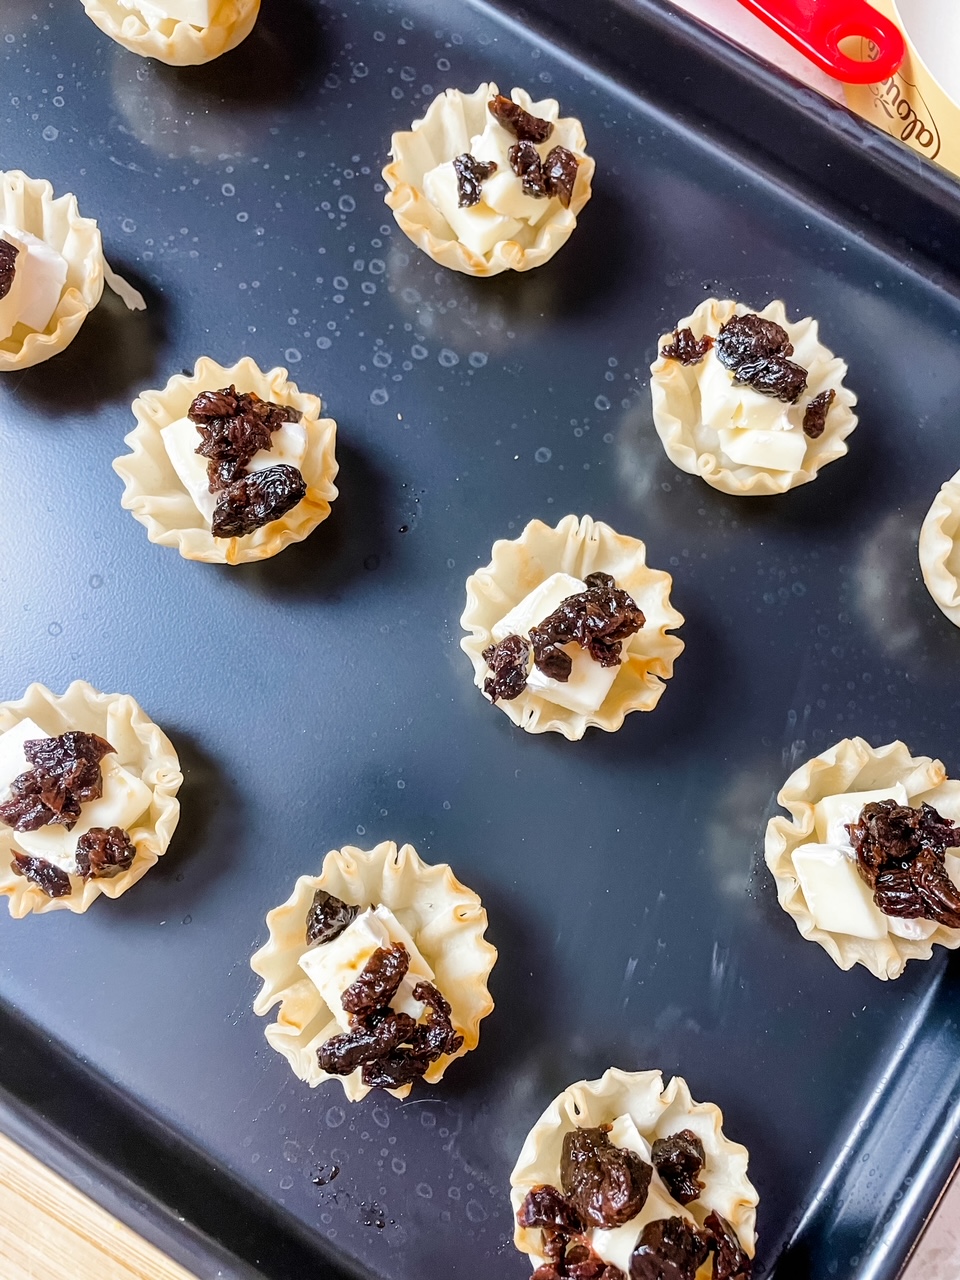 The tarts with the brie and dried cherries